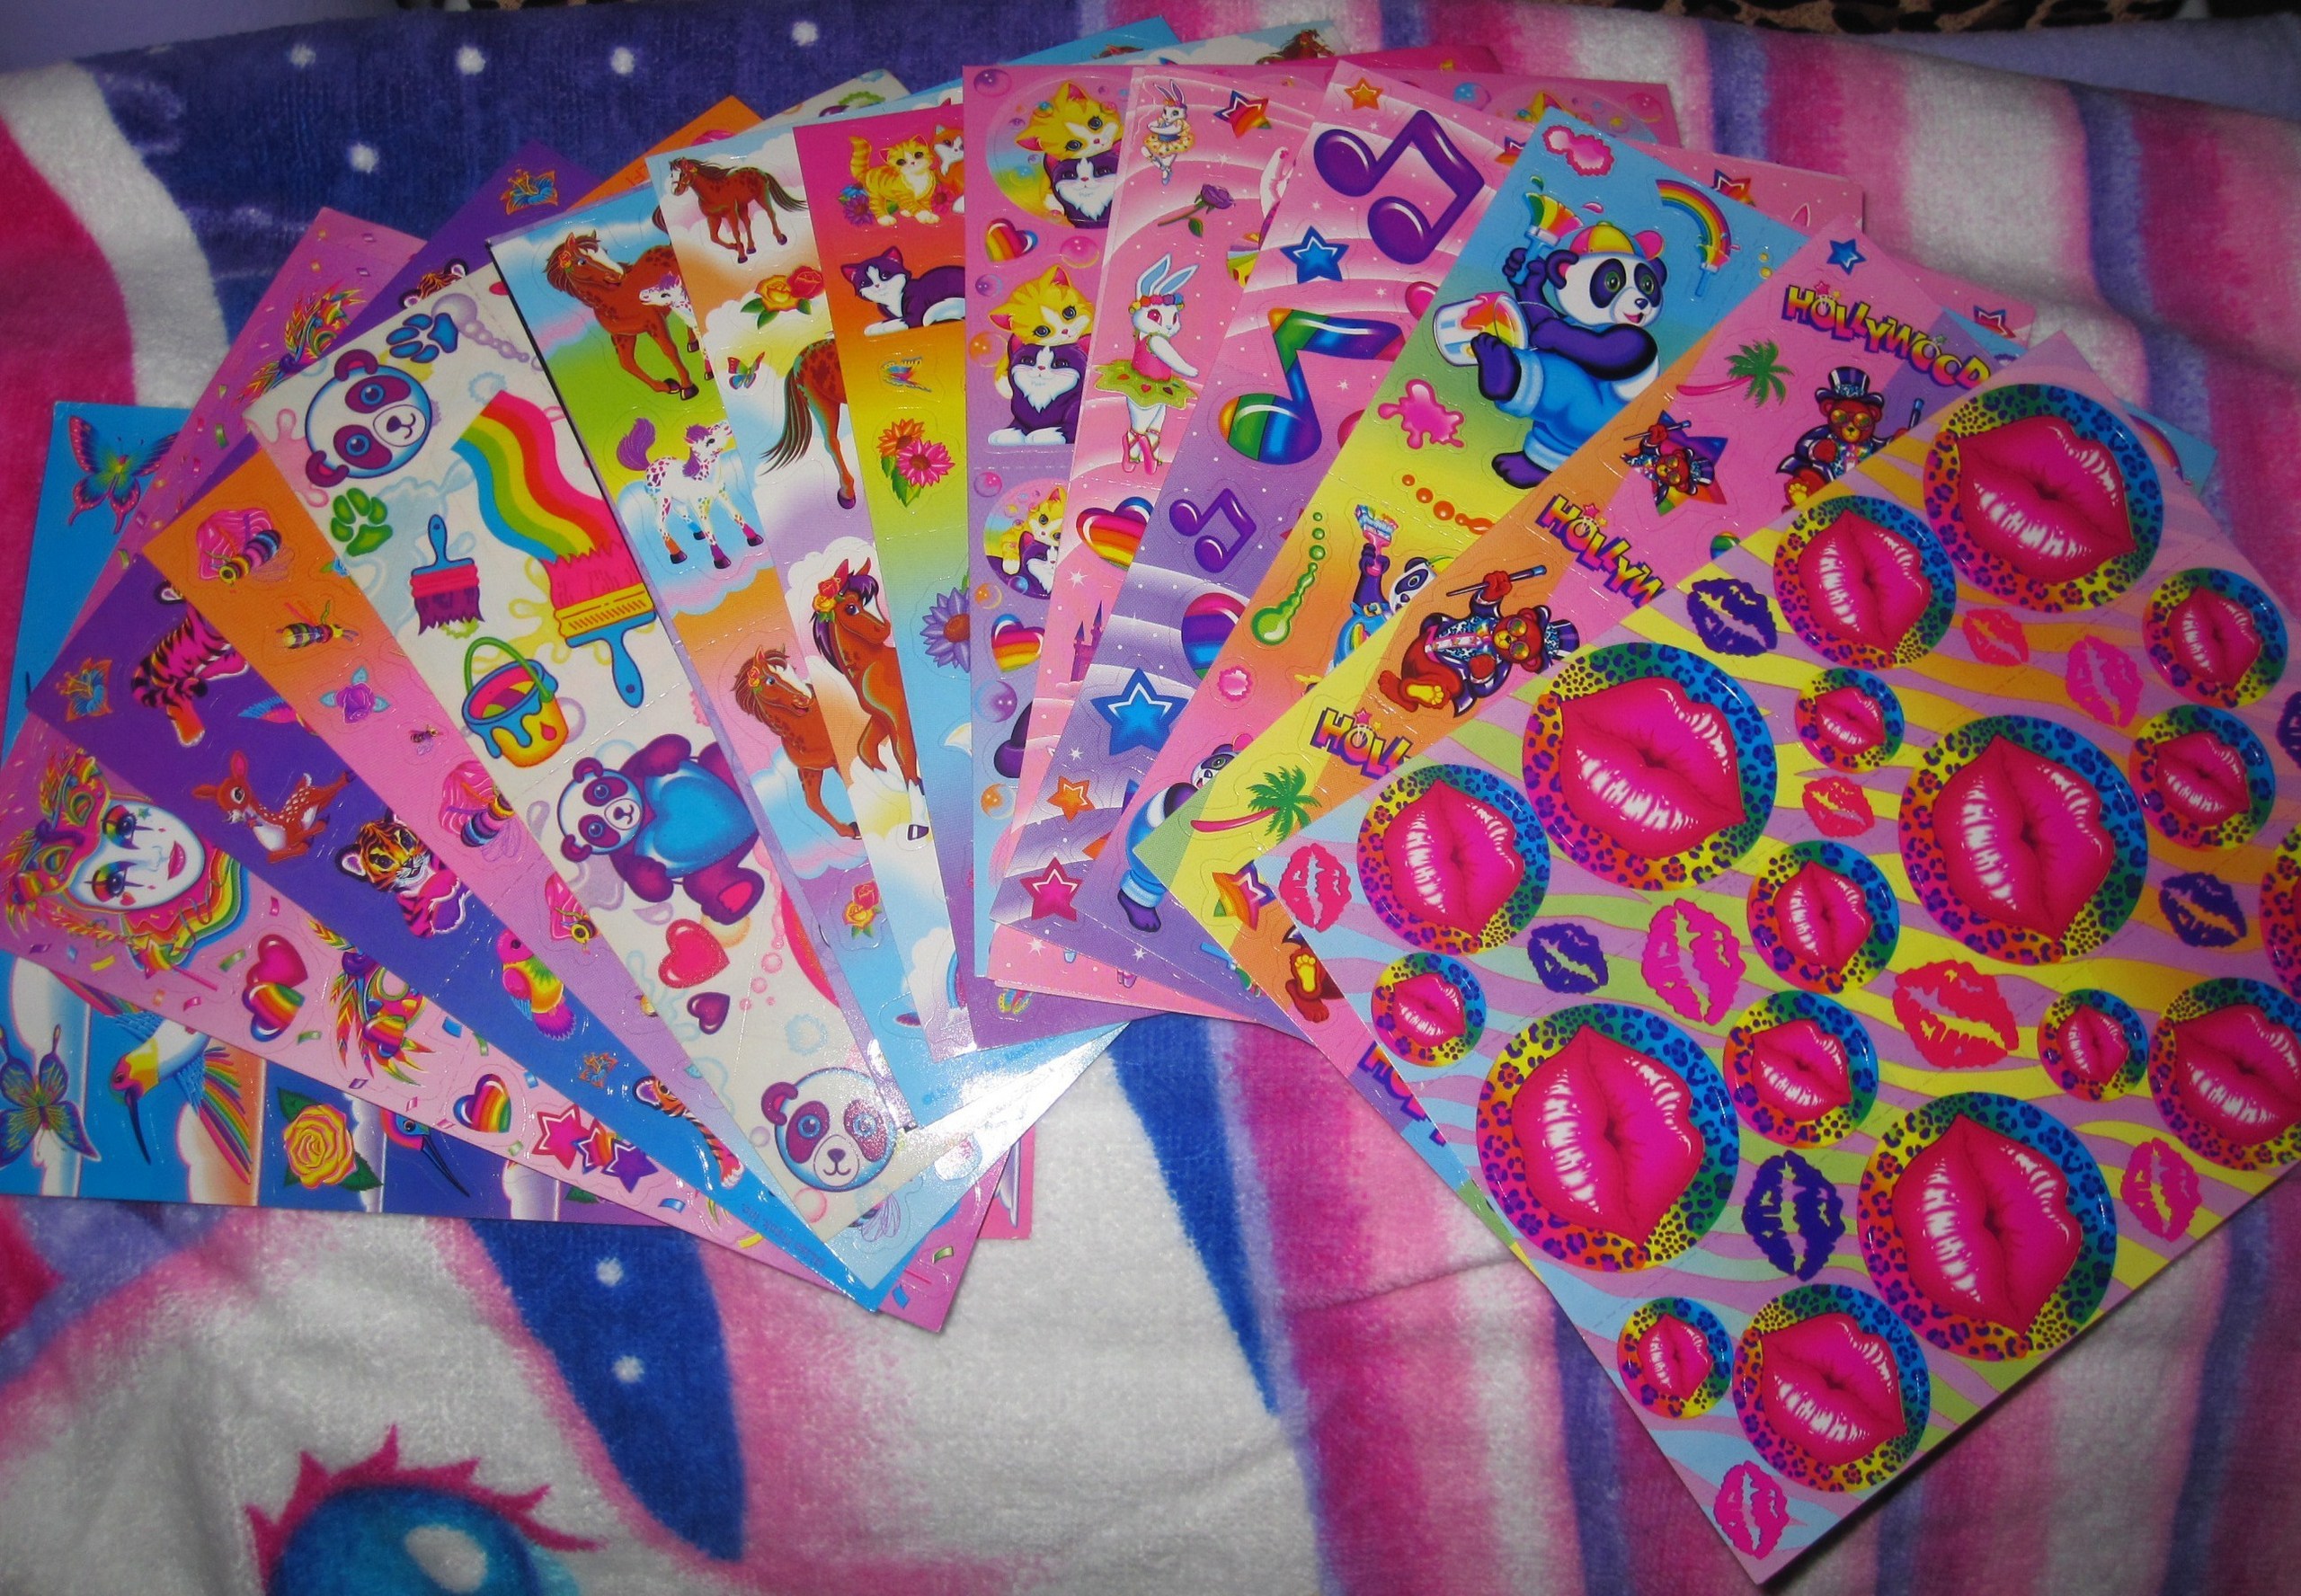 90 S Stickers With Her Original Characters - Lisa Frank 90s Stickers - HD Wallpaper 